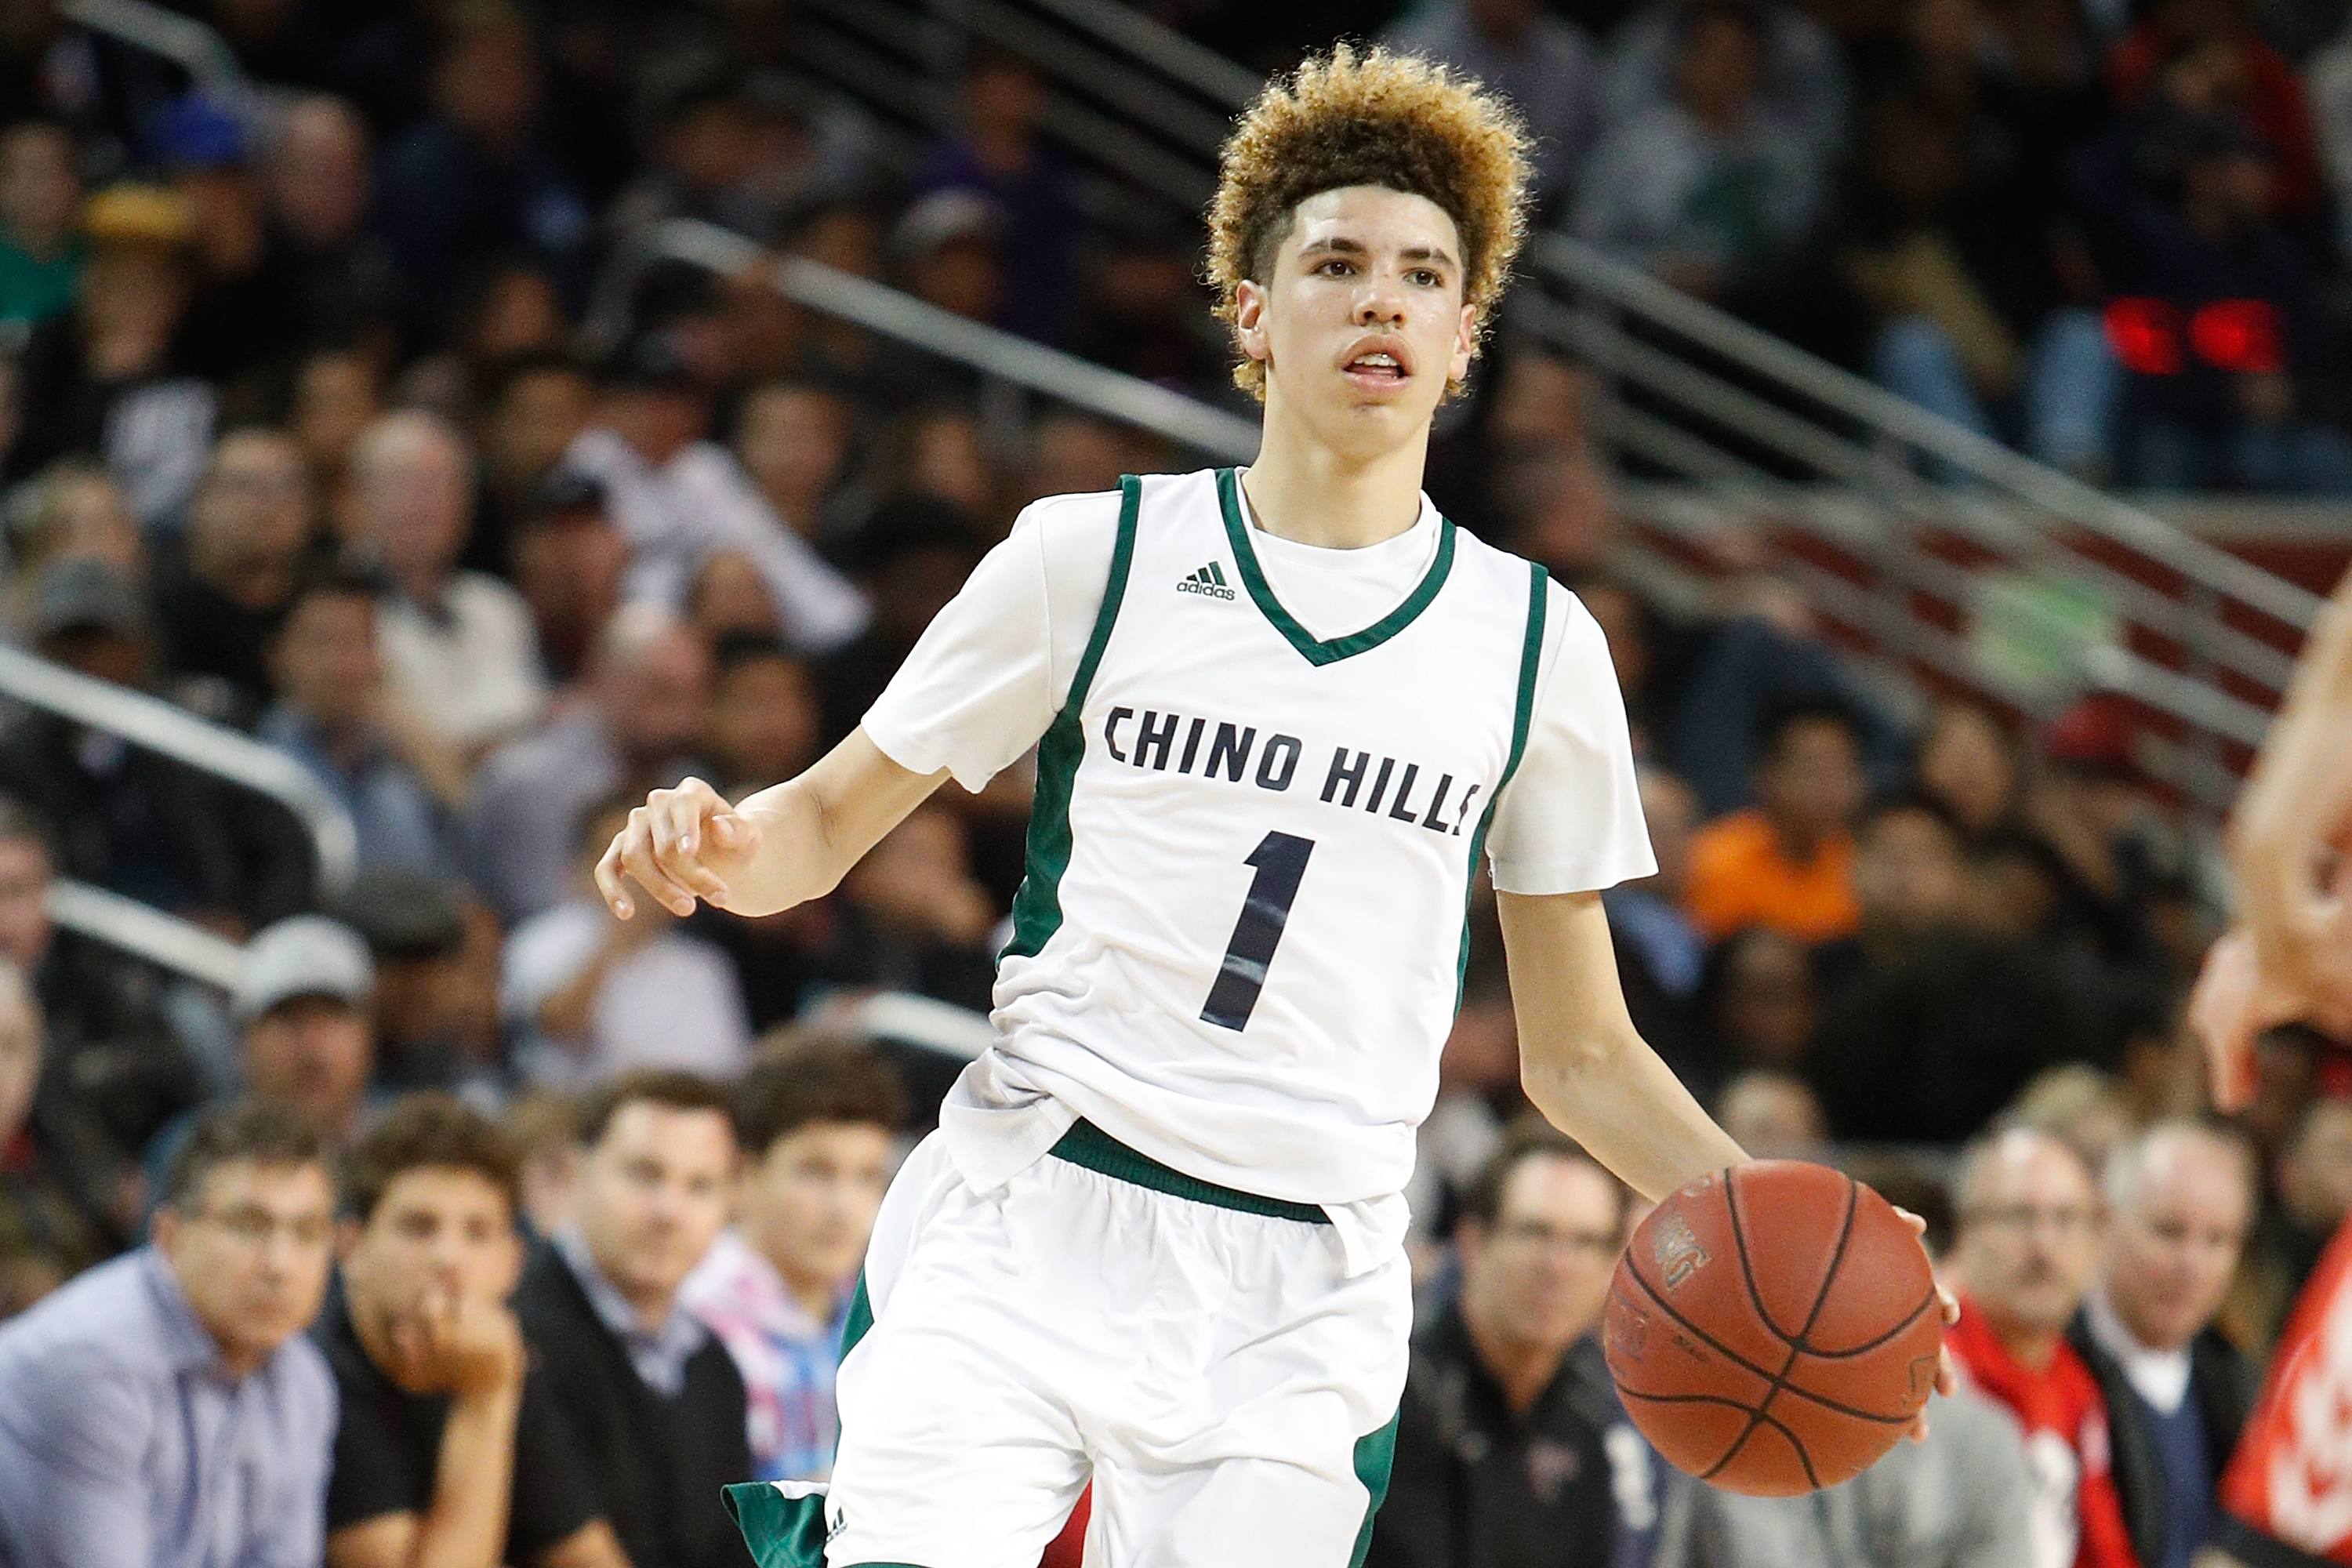 LiAngelo and LaMelo Ball to Play Professionally in Lithuania - The